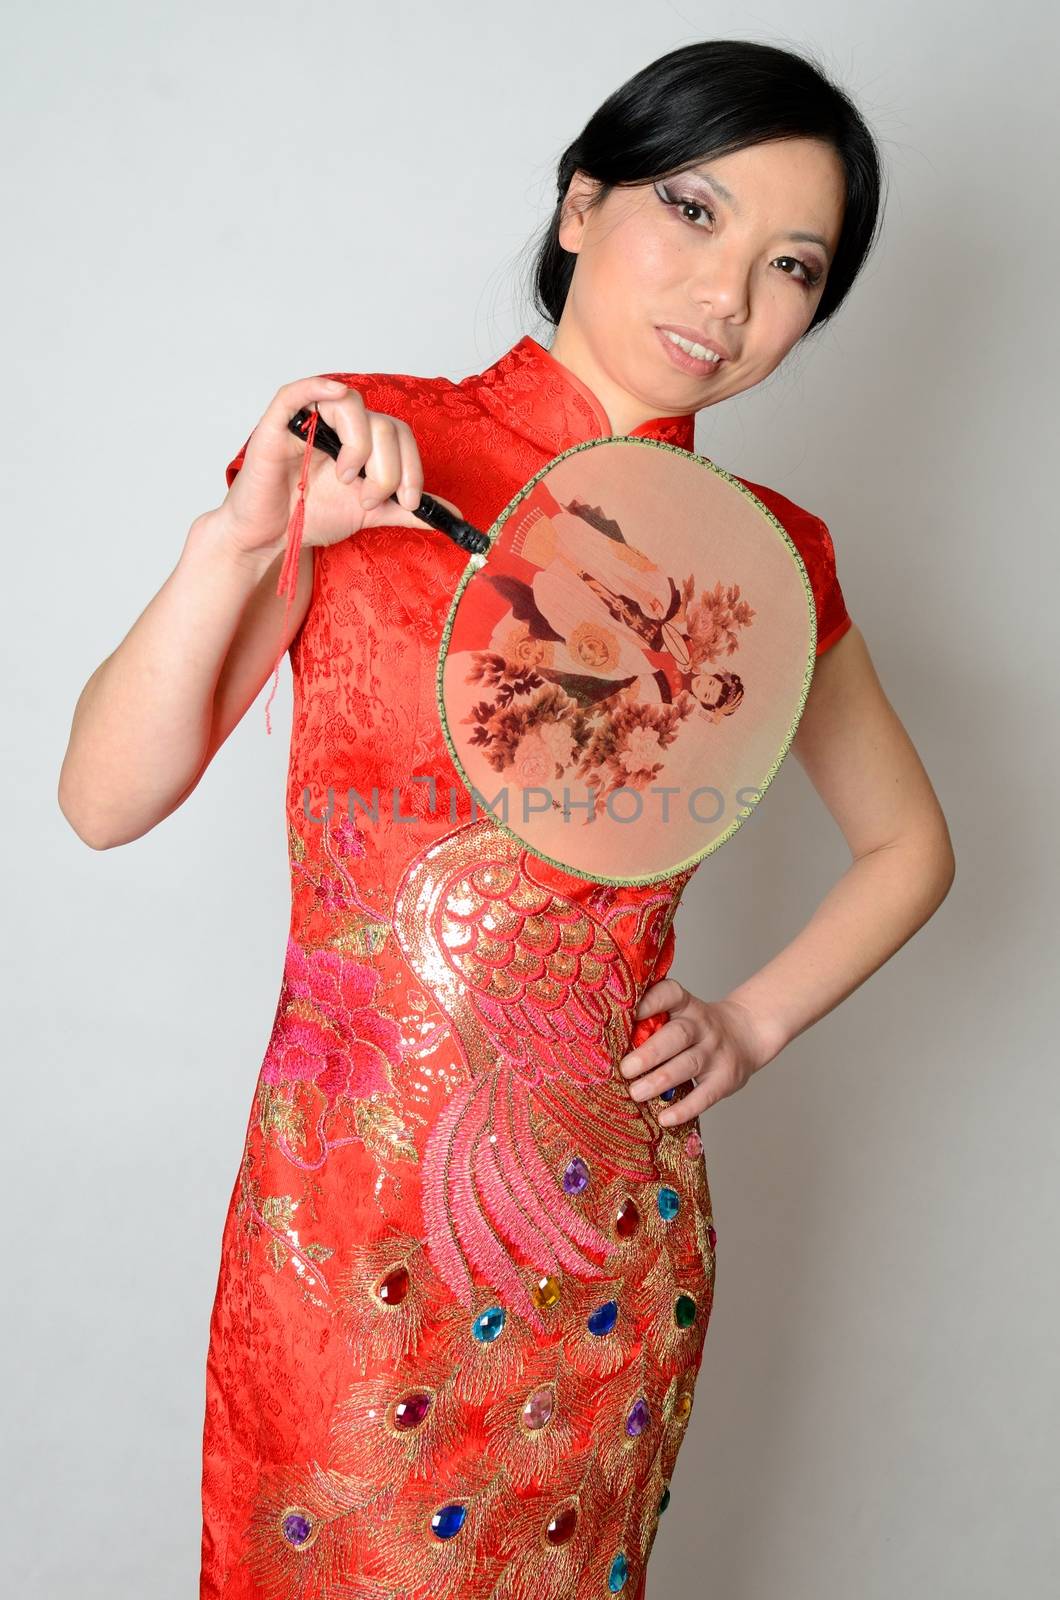 Elegant Chinese lady wearing traditional red dress. Pretty Asian female model holding fan in her hand. 